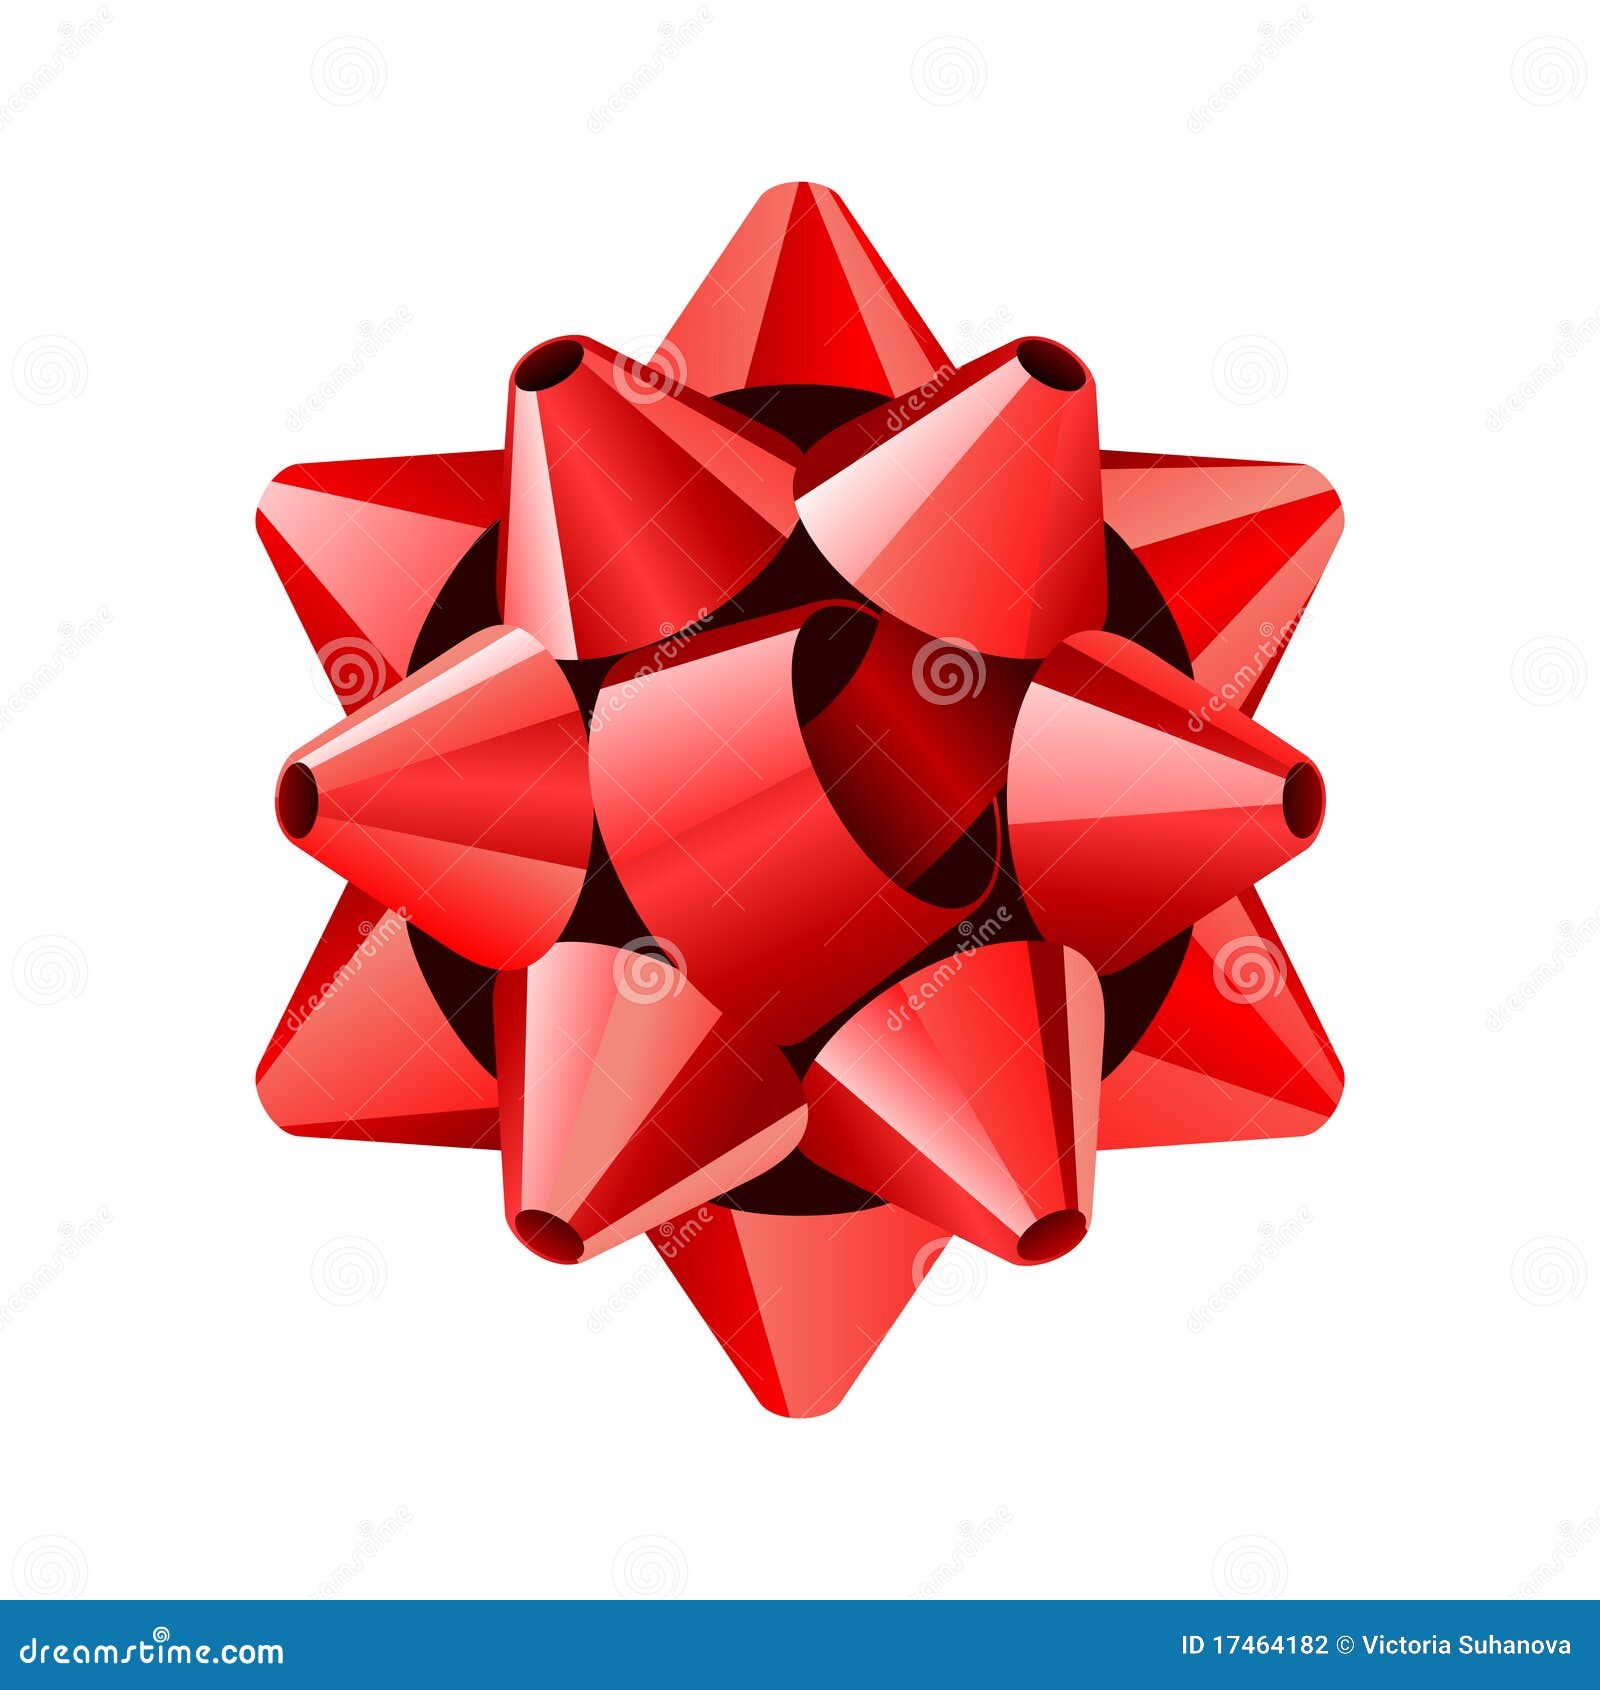 big red bow clipart - photo #45